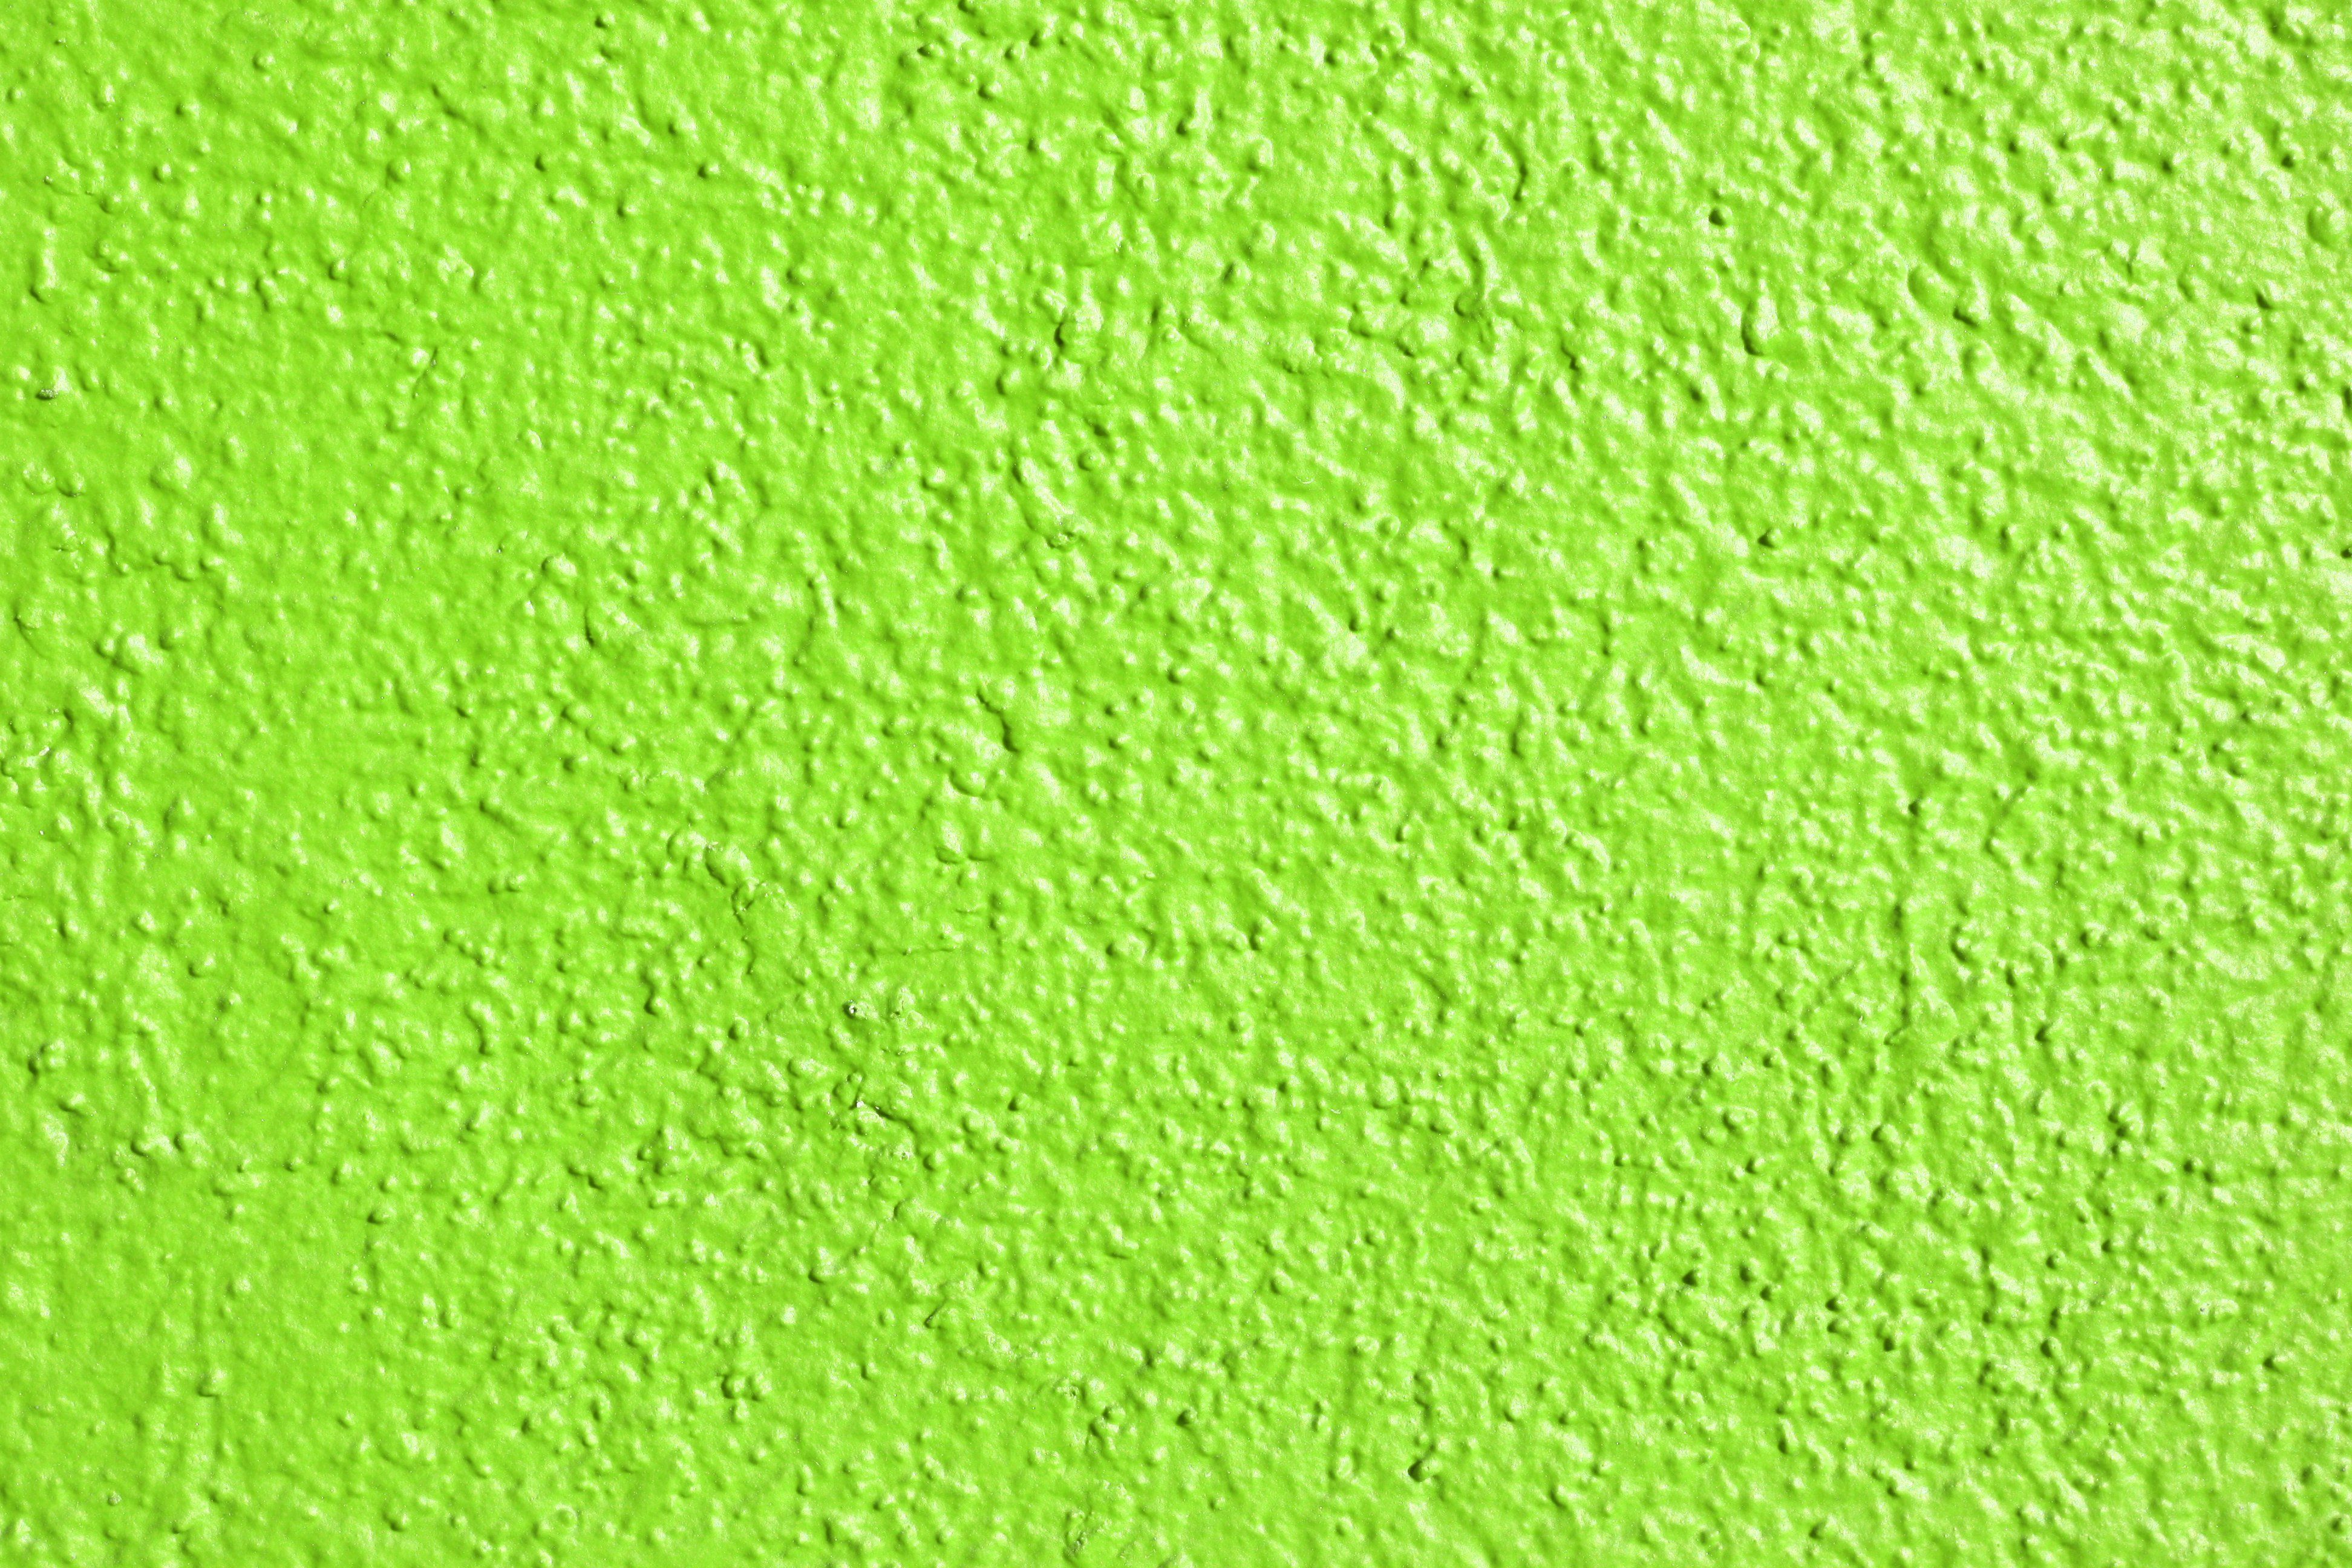 Lime Green Texture Background - 3888x2592 Wallpaper 